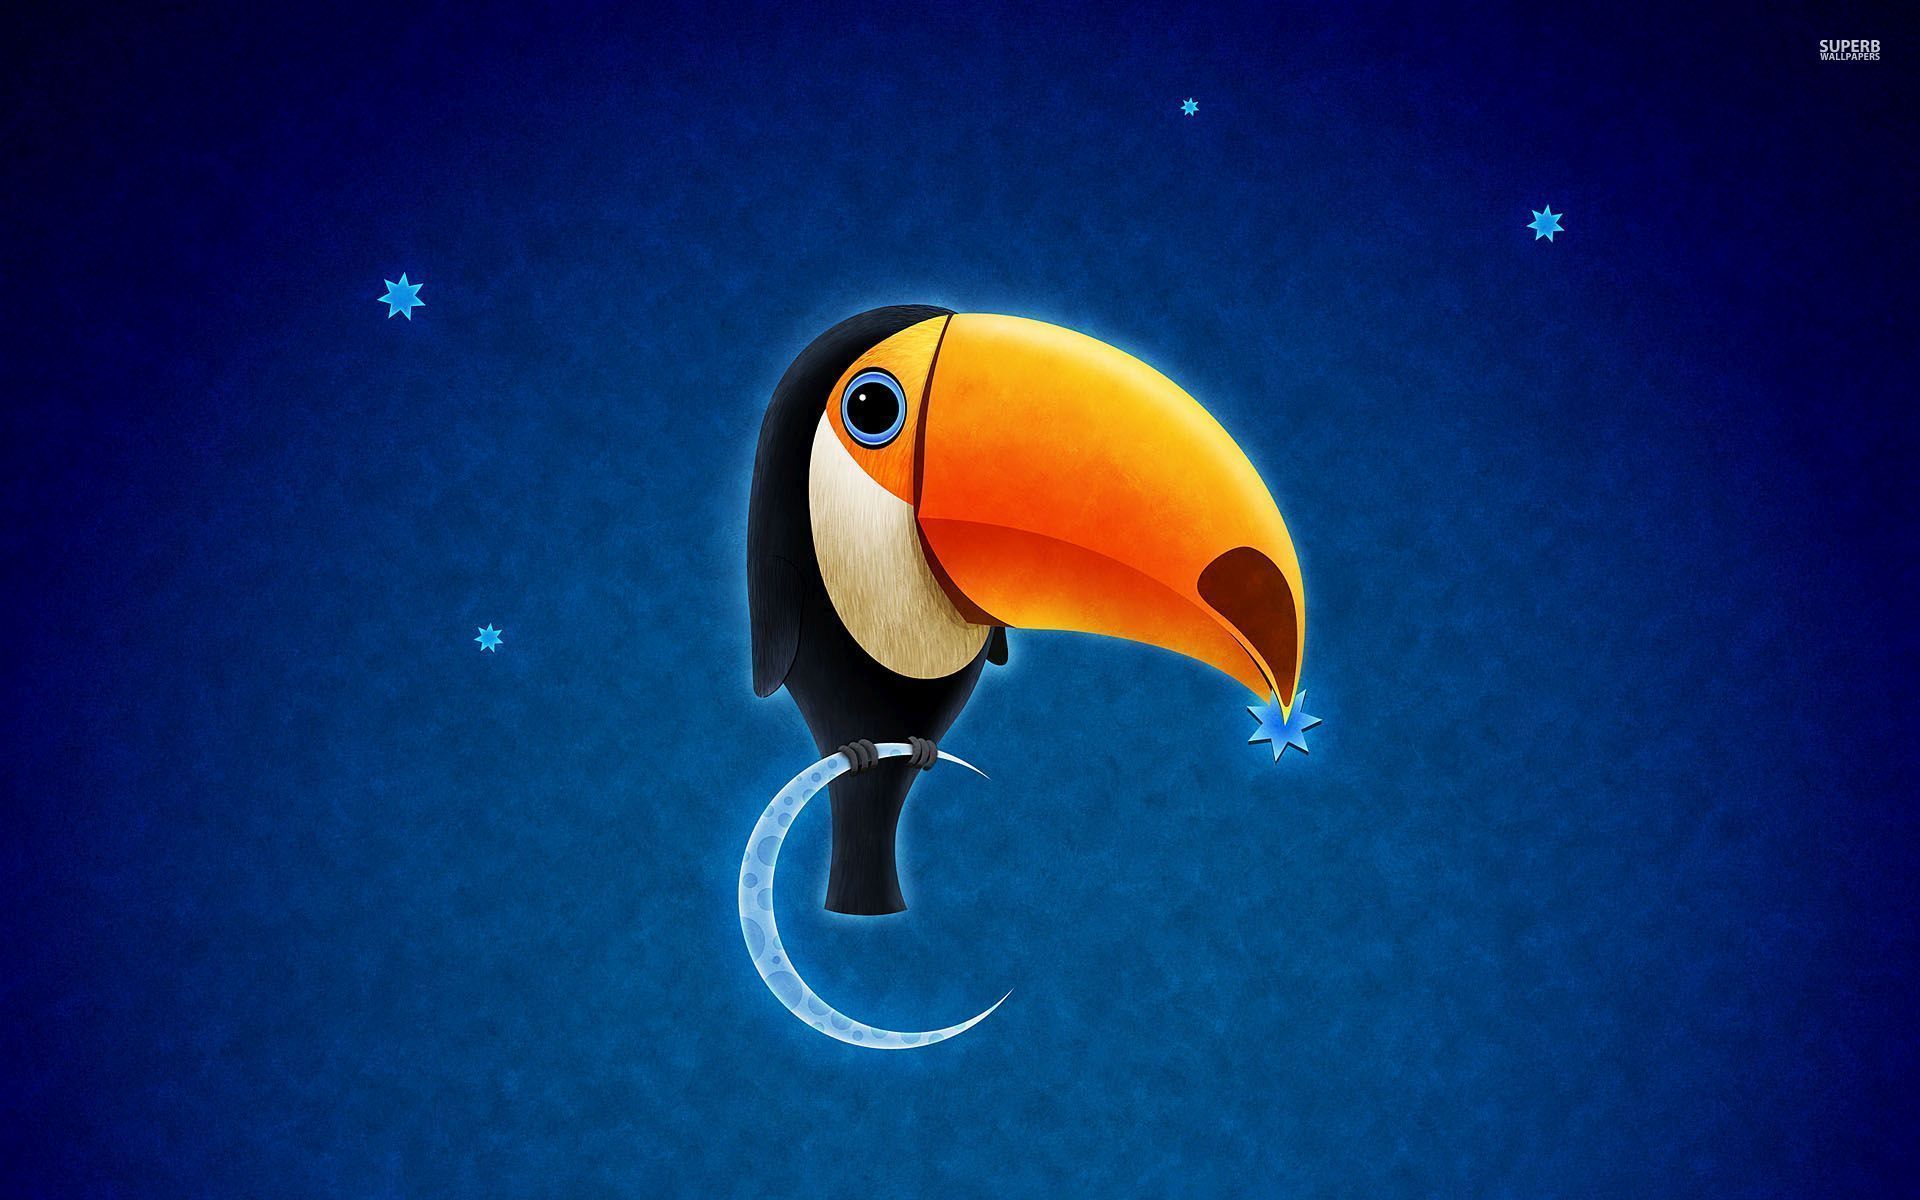 Toucan on the moon wallpaper - Artistic wallpapers - #36377